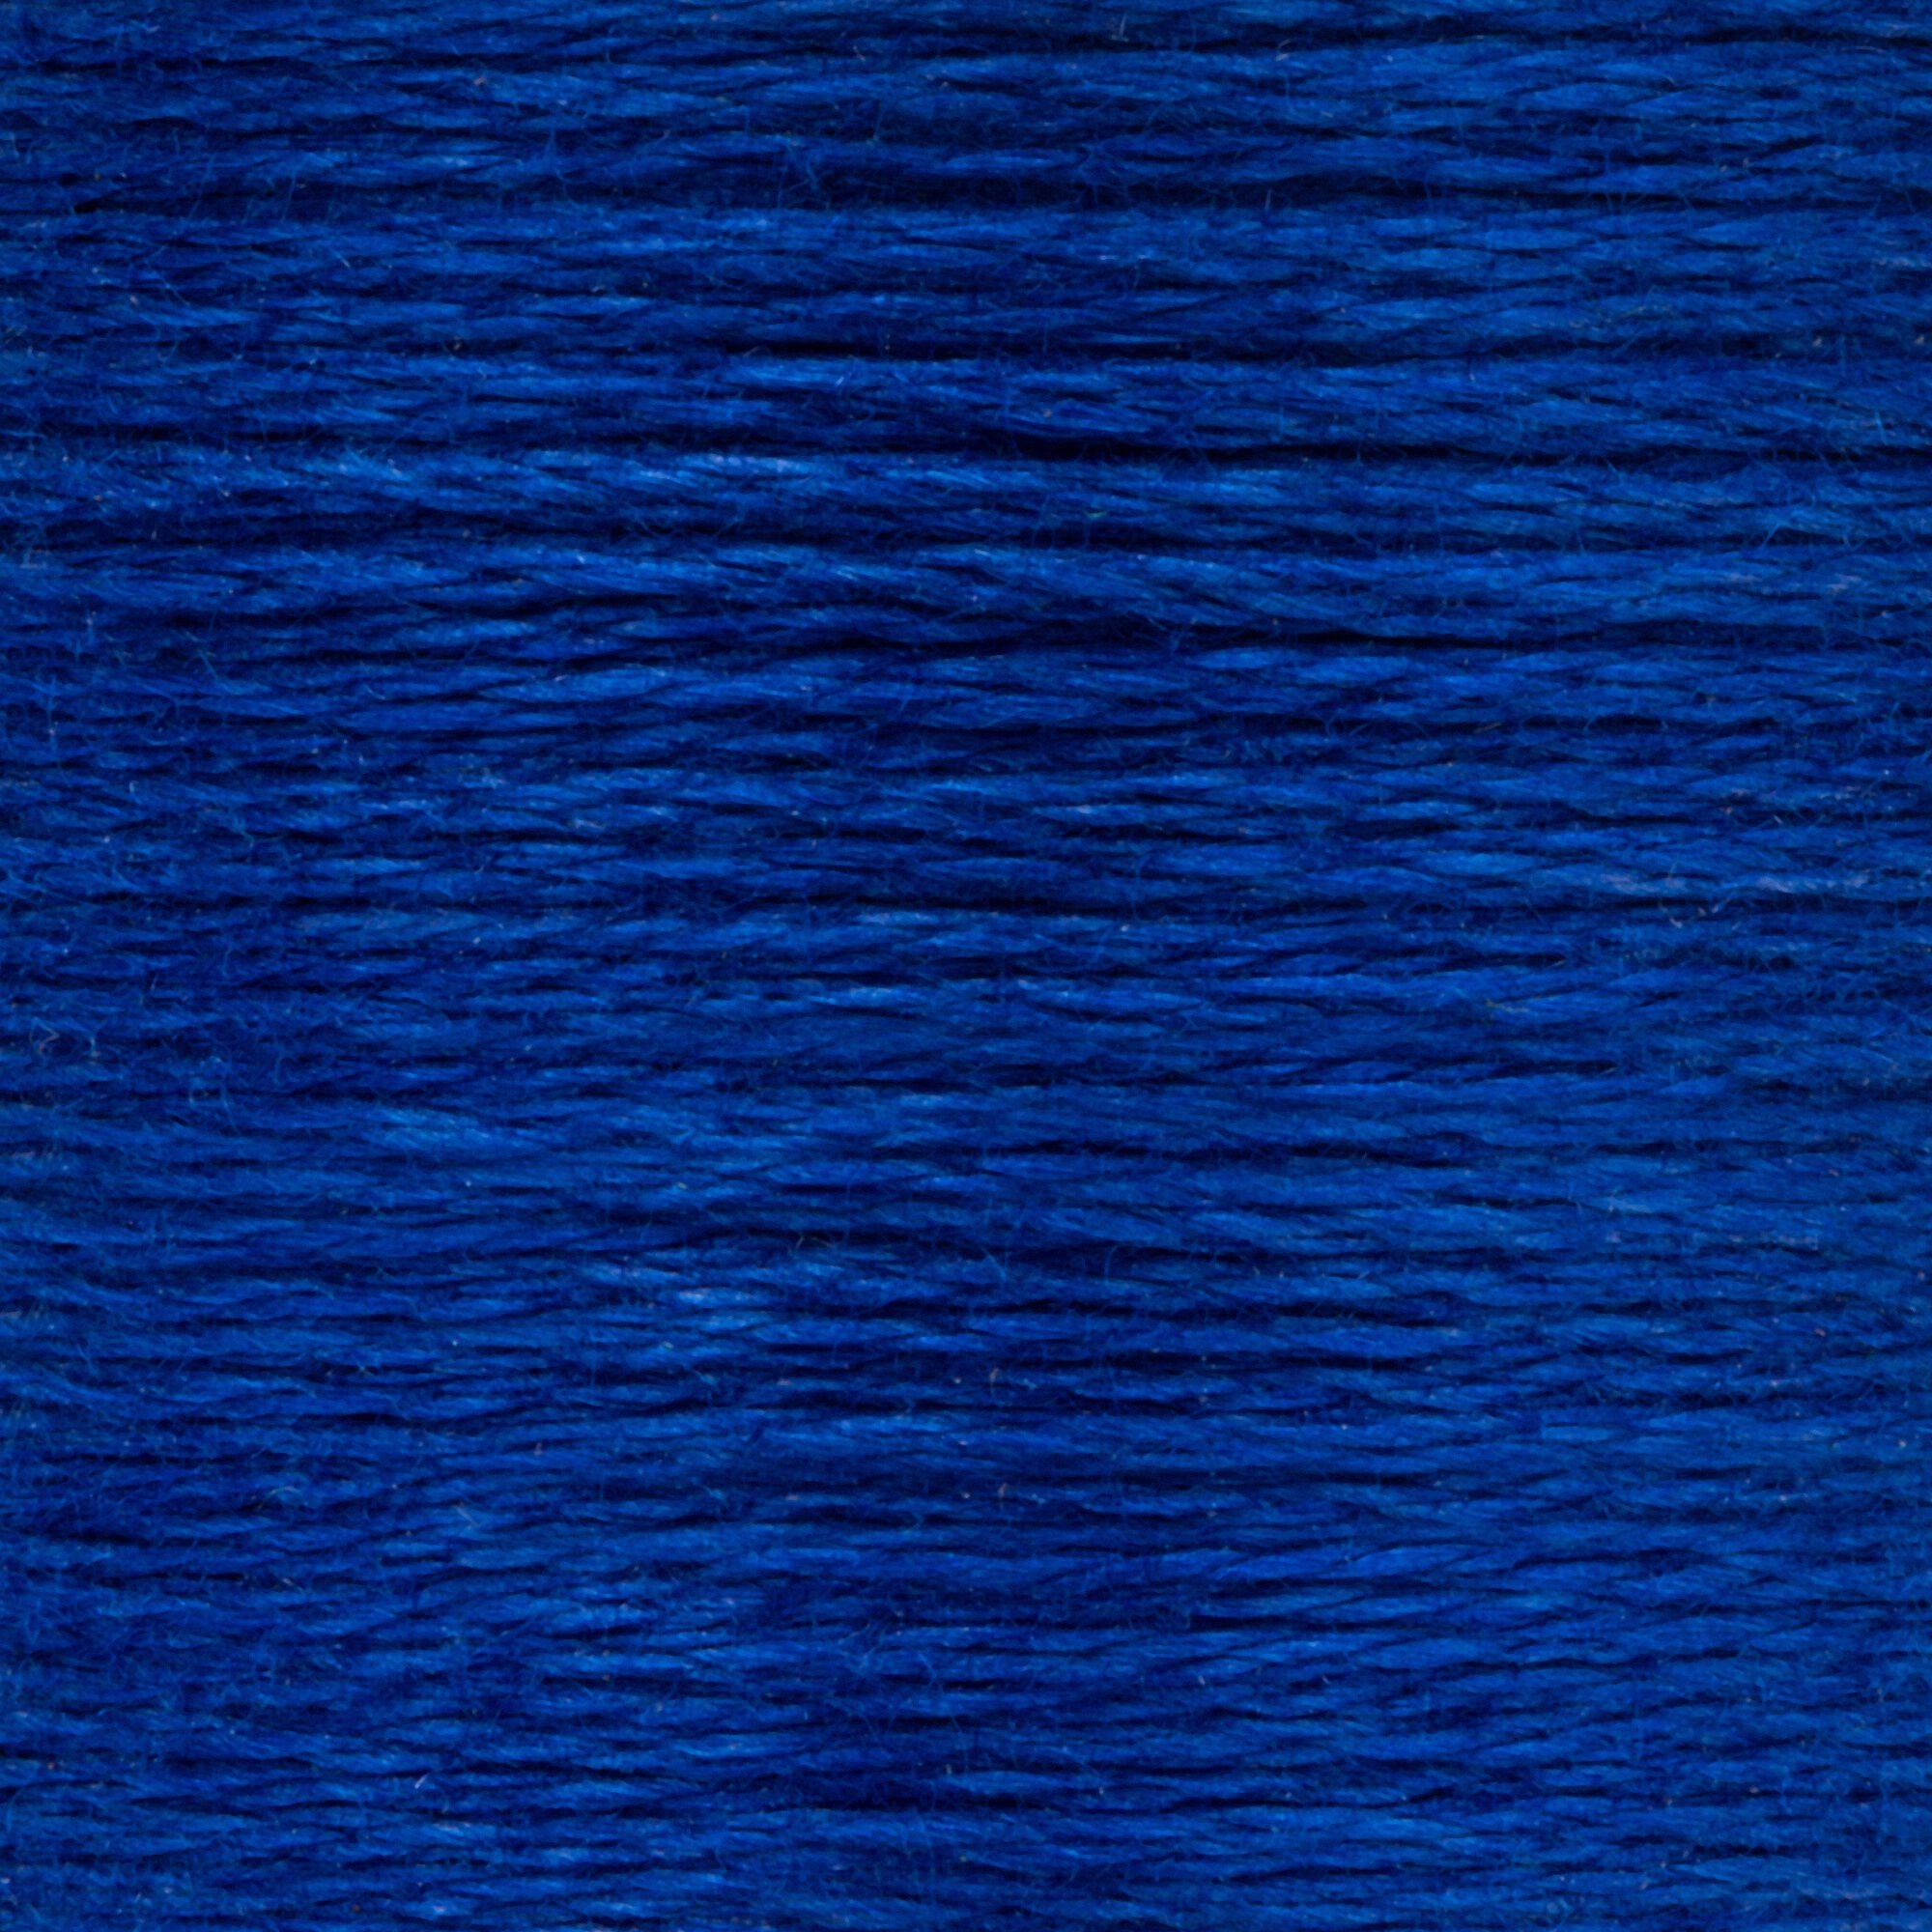 Anchor Embroidery Floss in Cobalt Blue Vy Dk